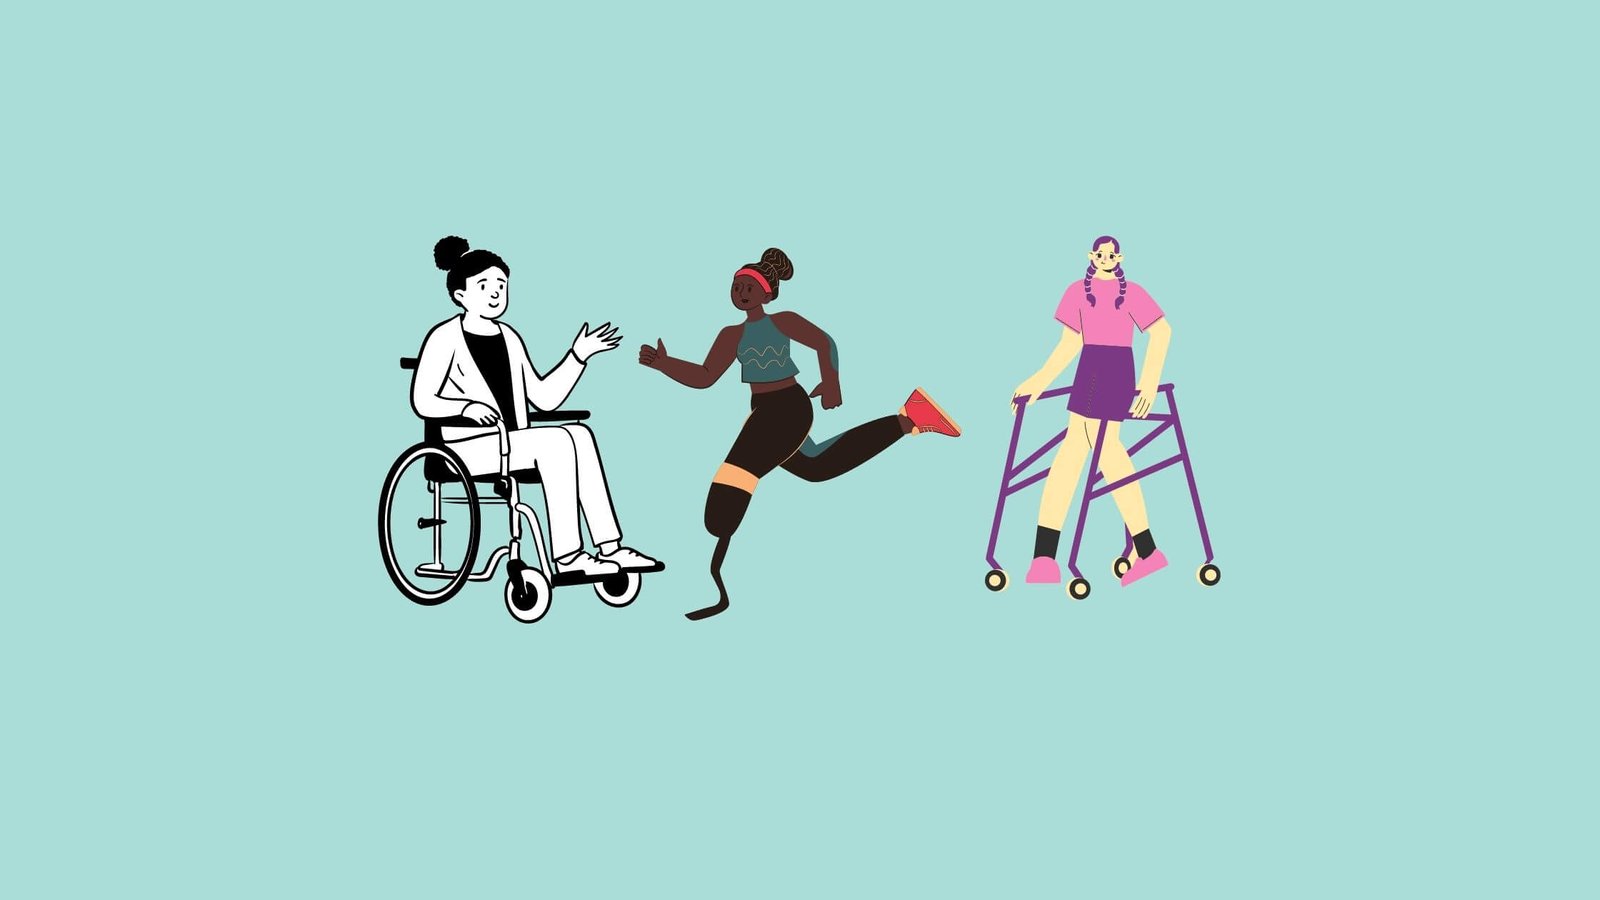 EXERCISES FOR DISABLED PEOPLE